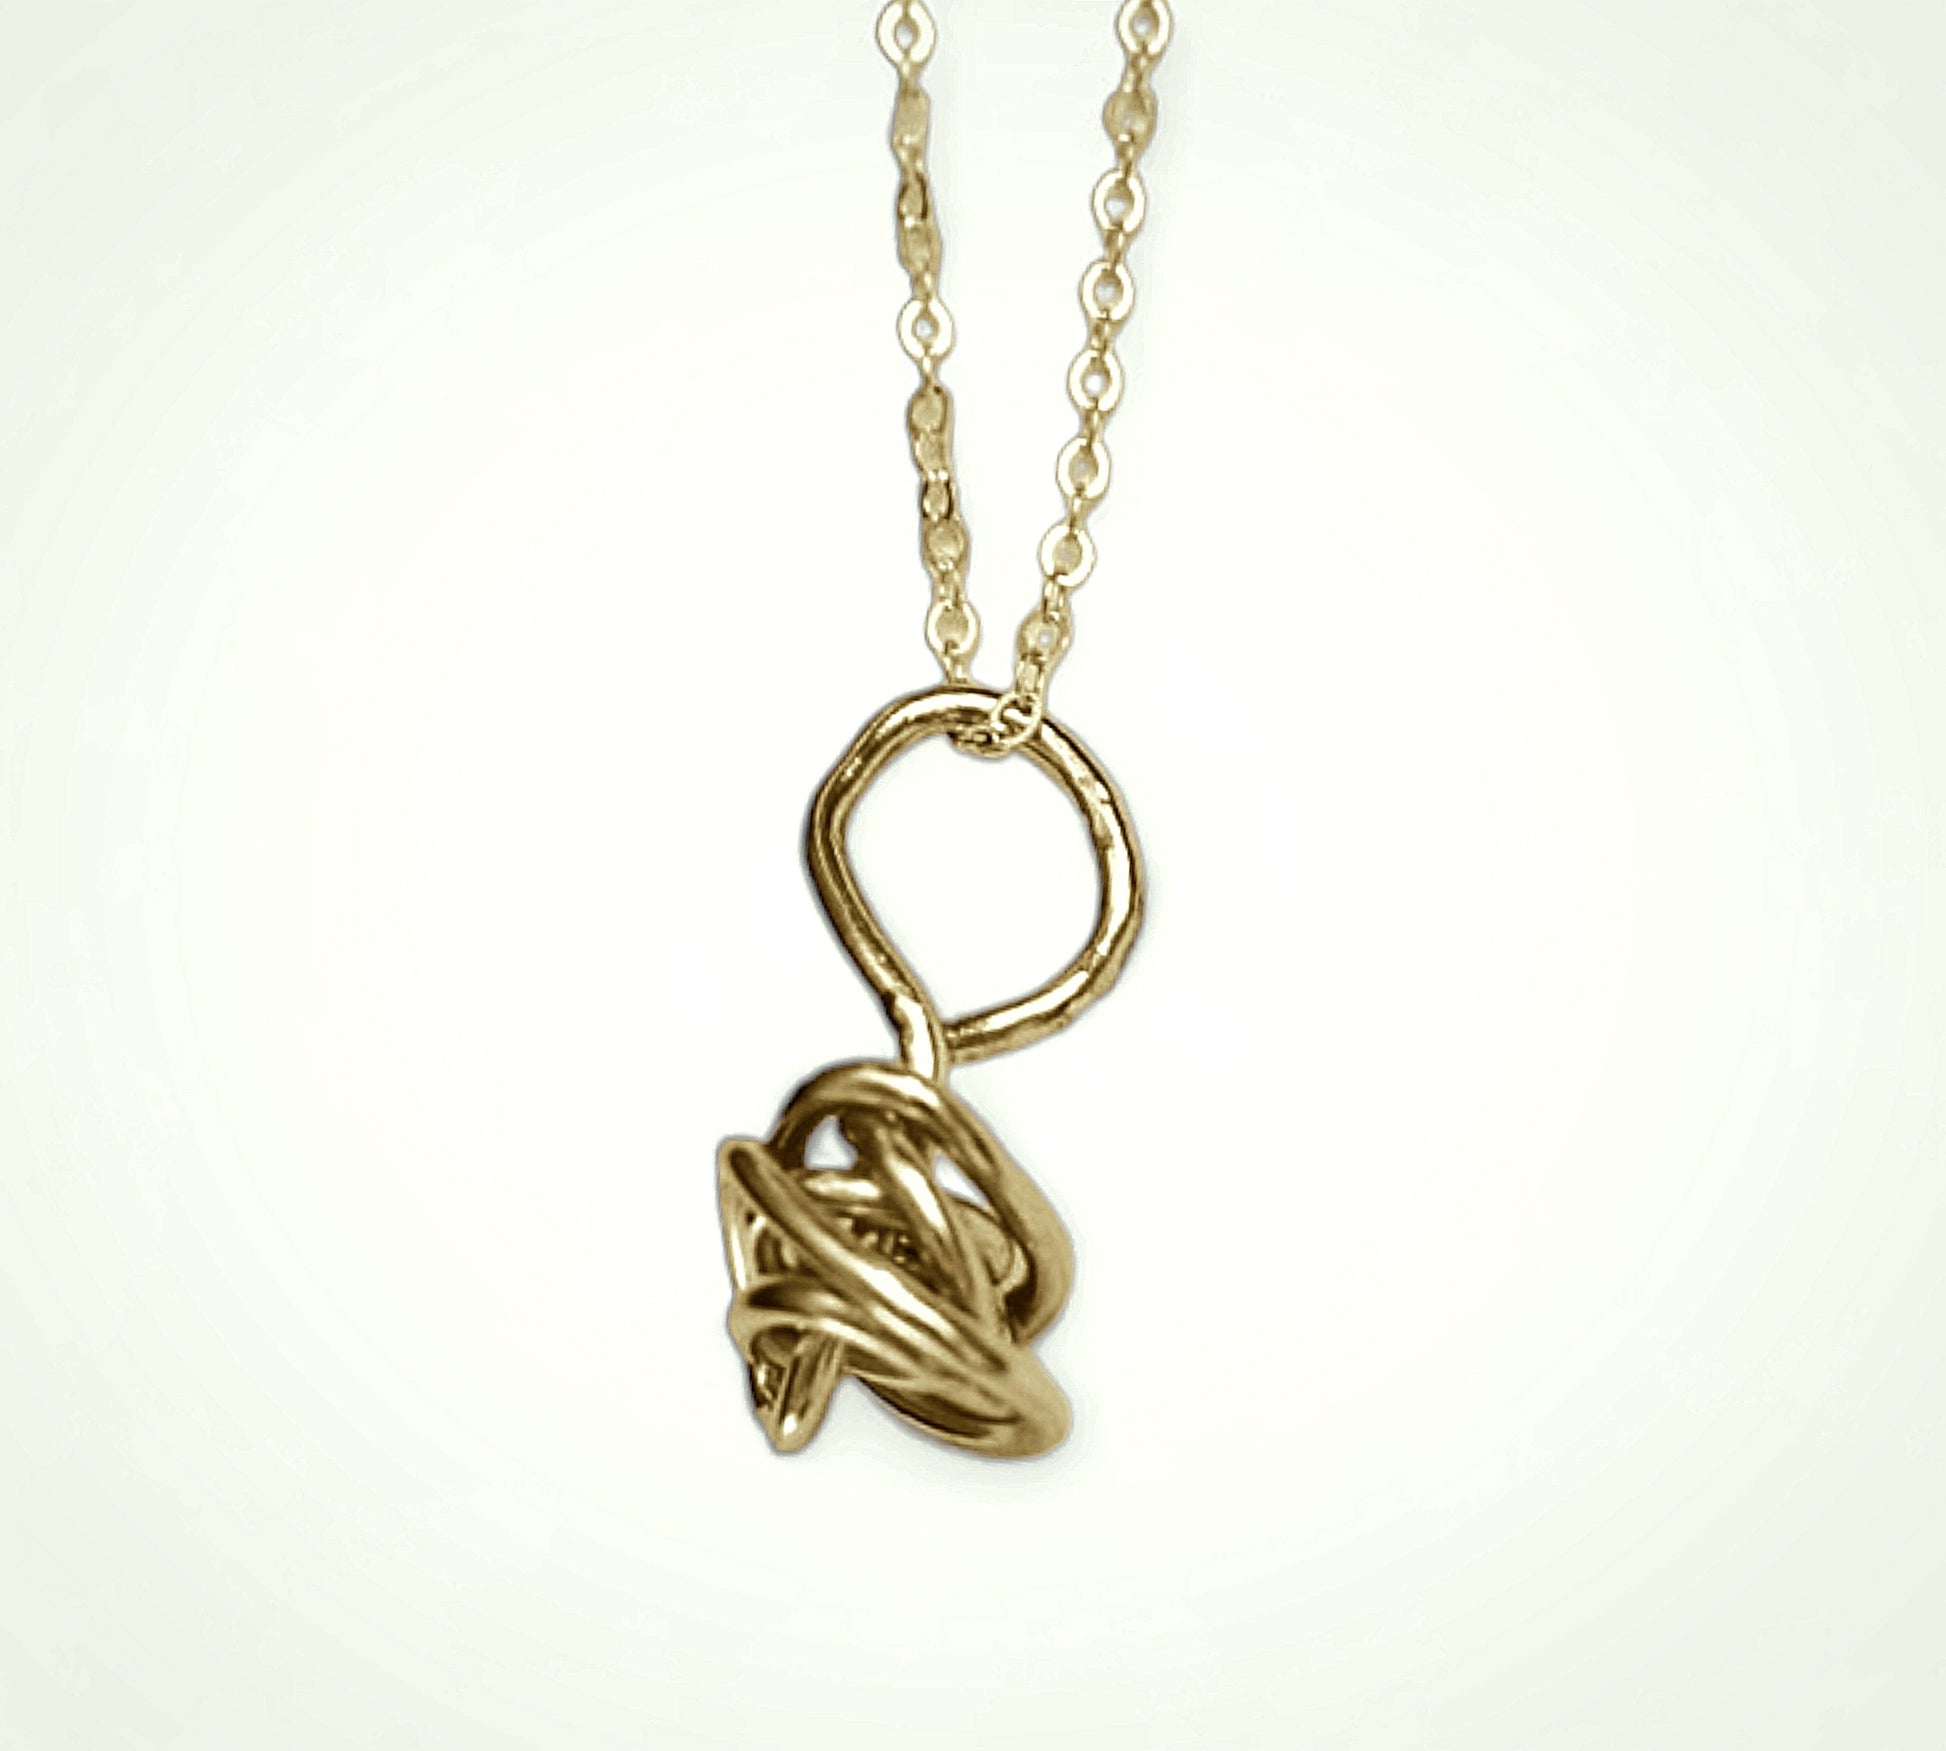 14K Gold Winding knot necklace for resilience